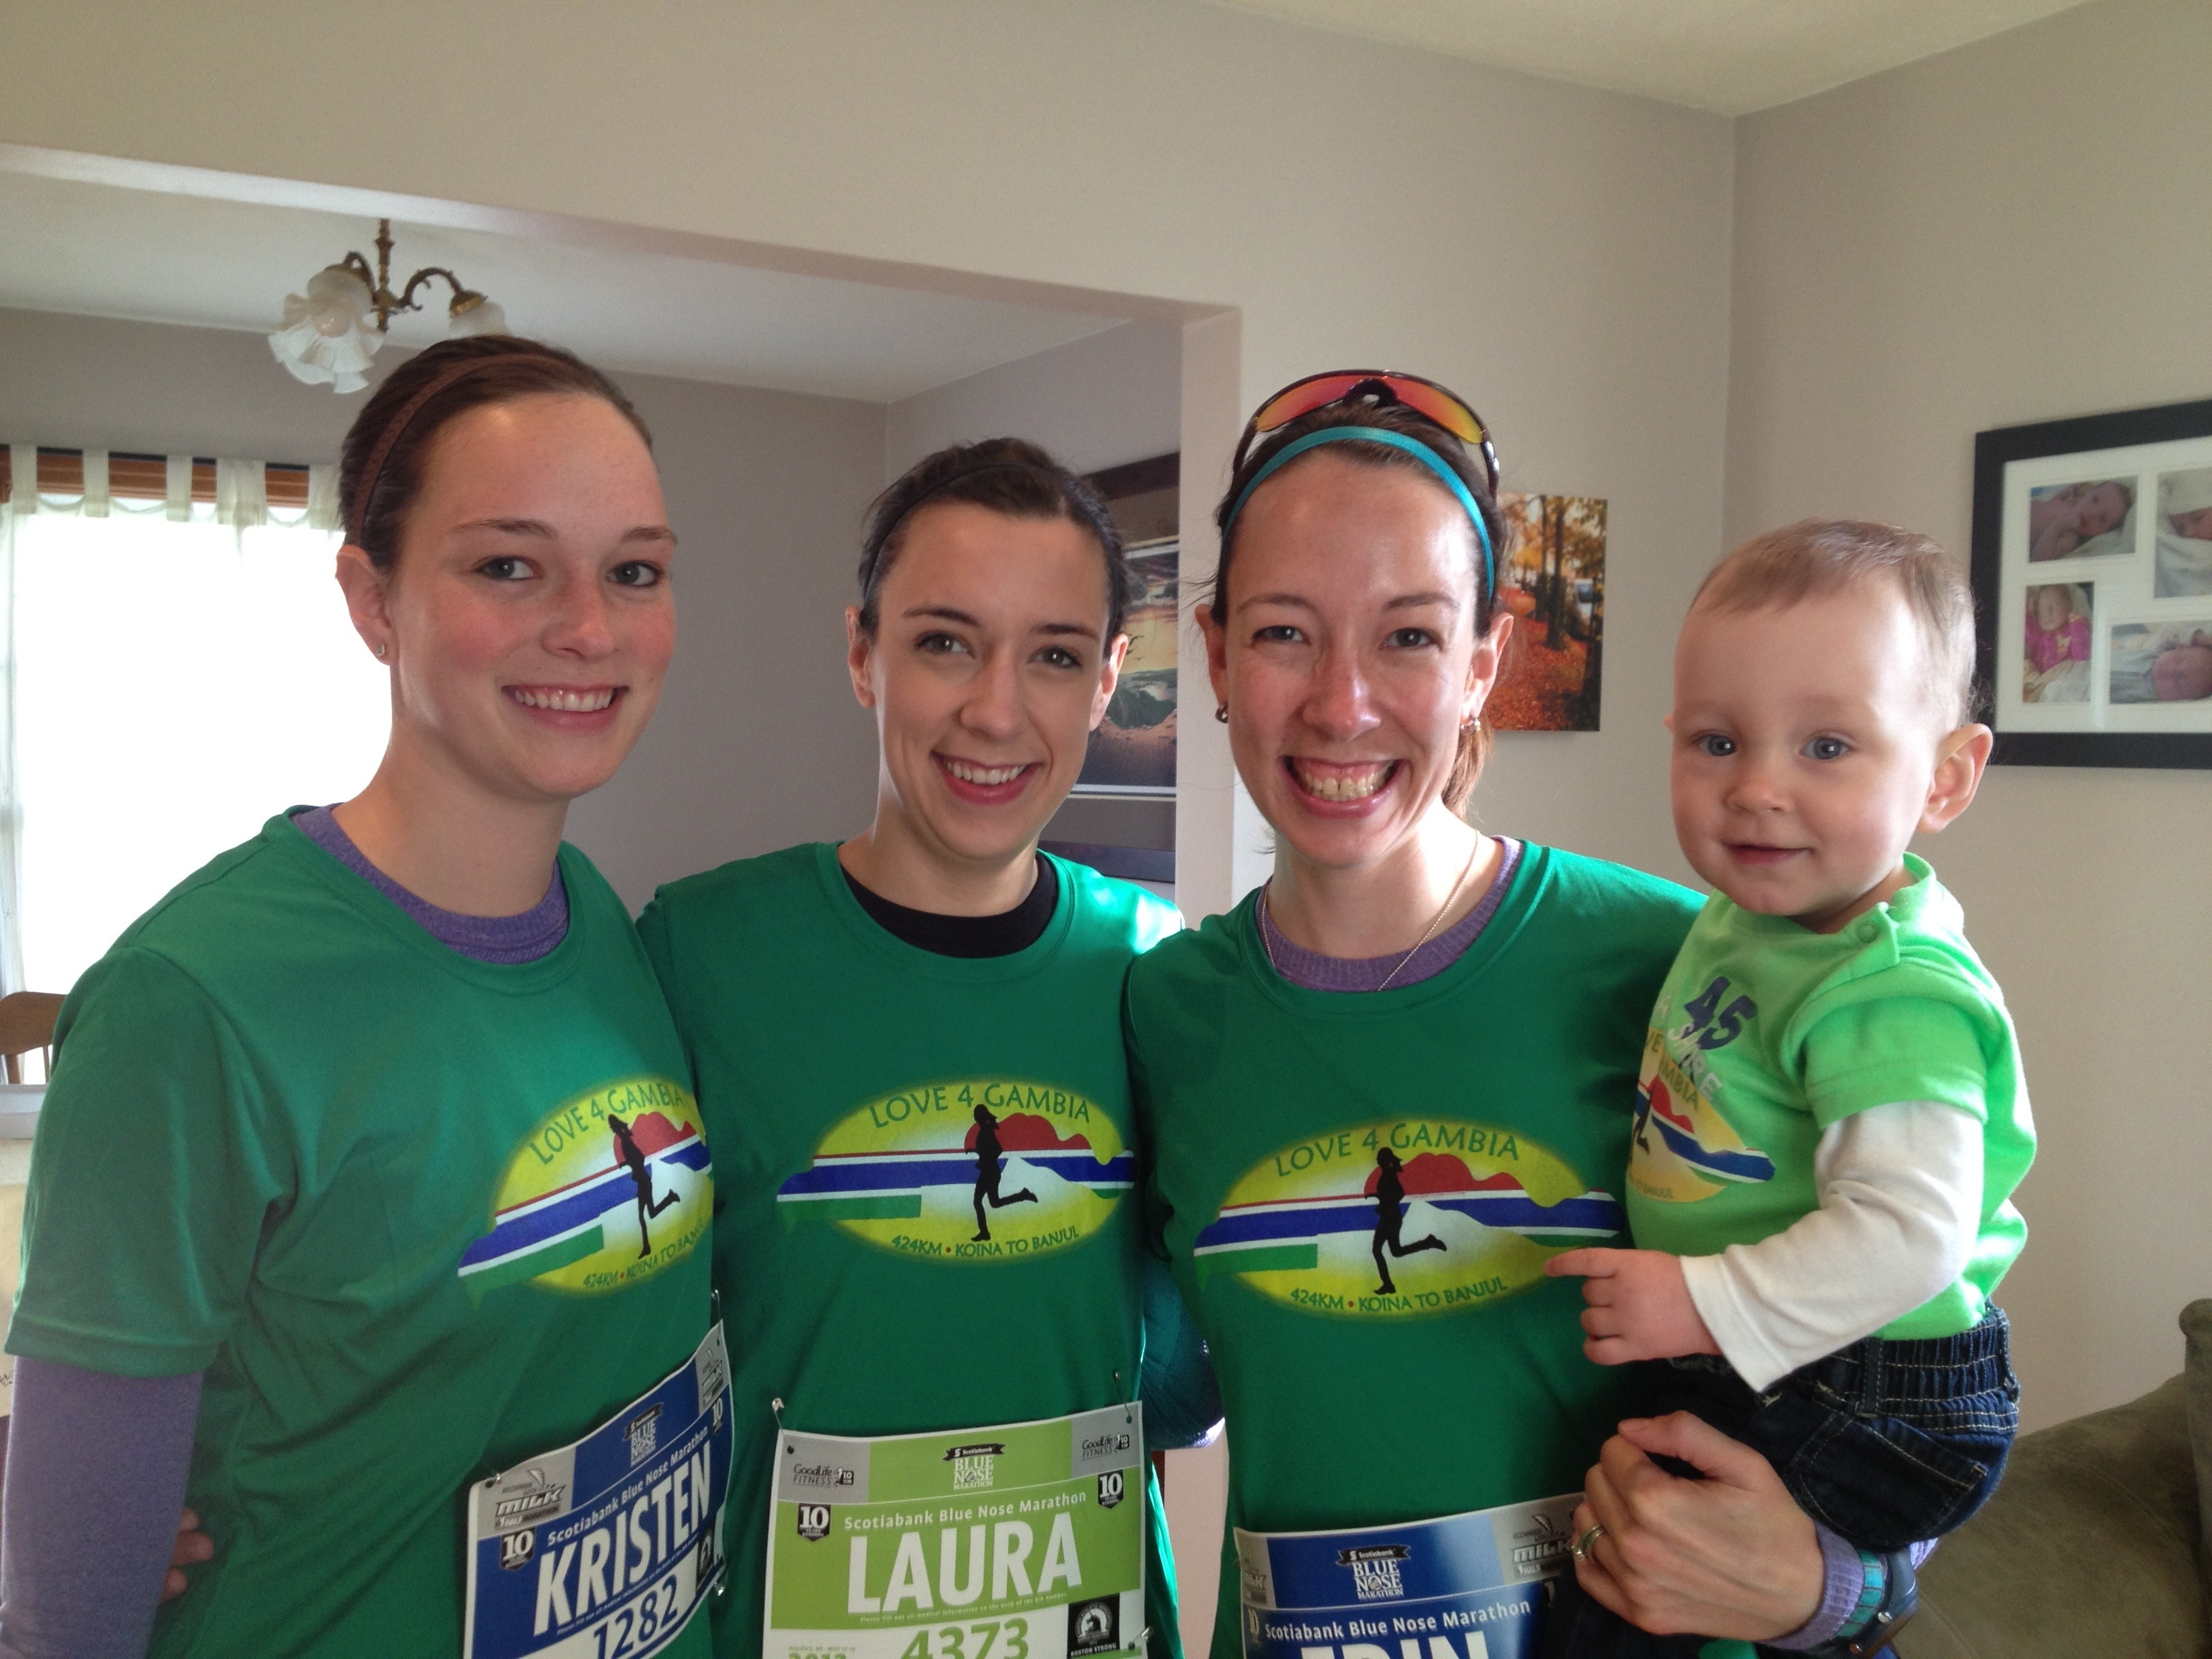 3 runners and a baby pre-race